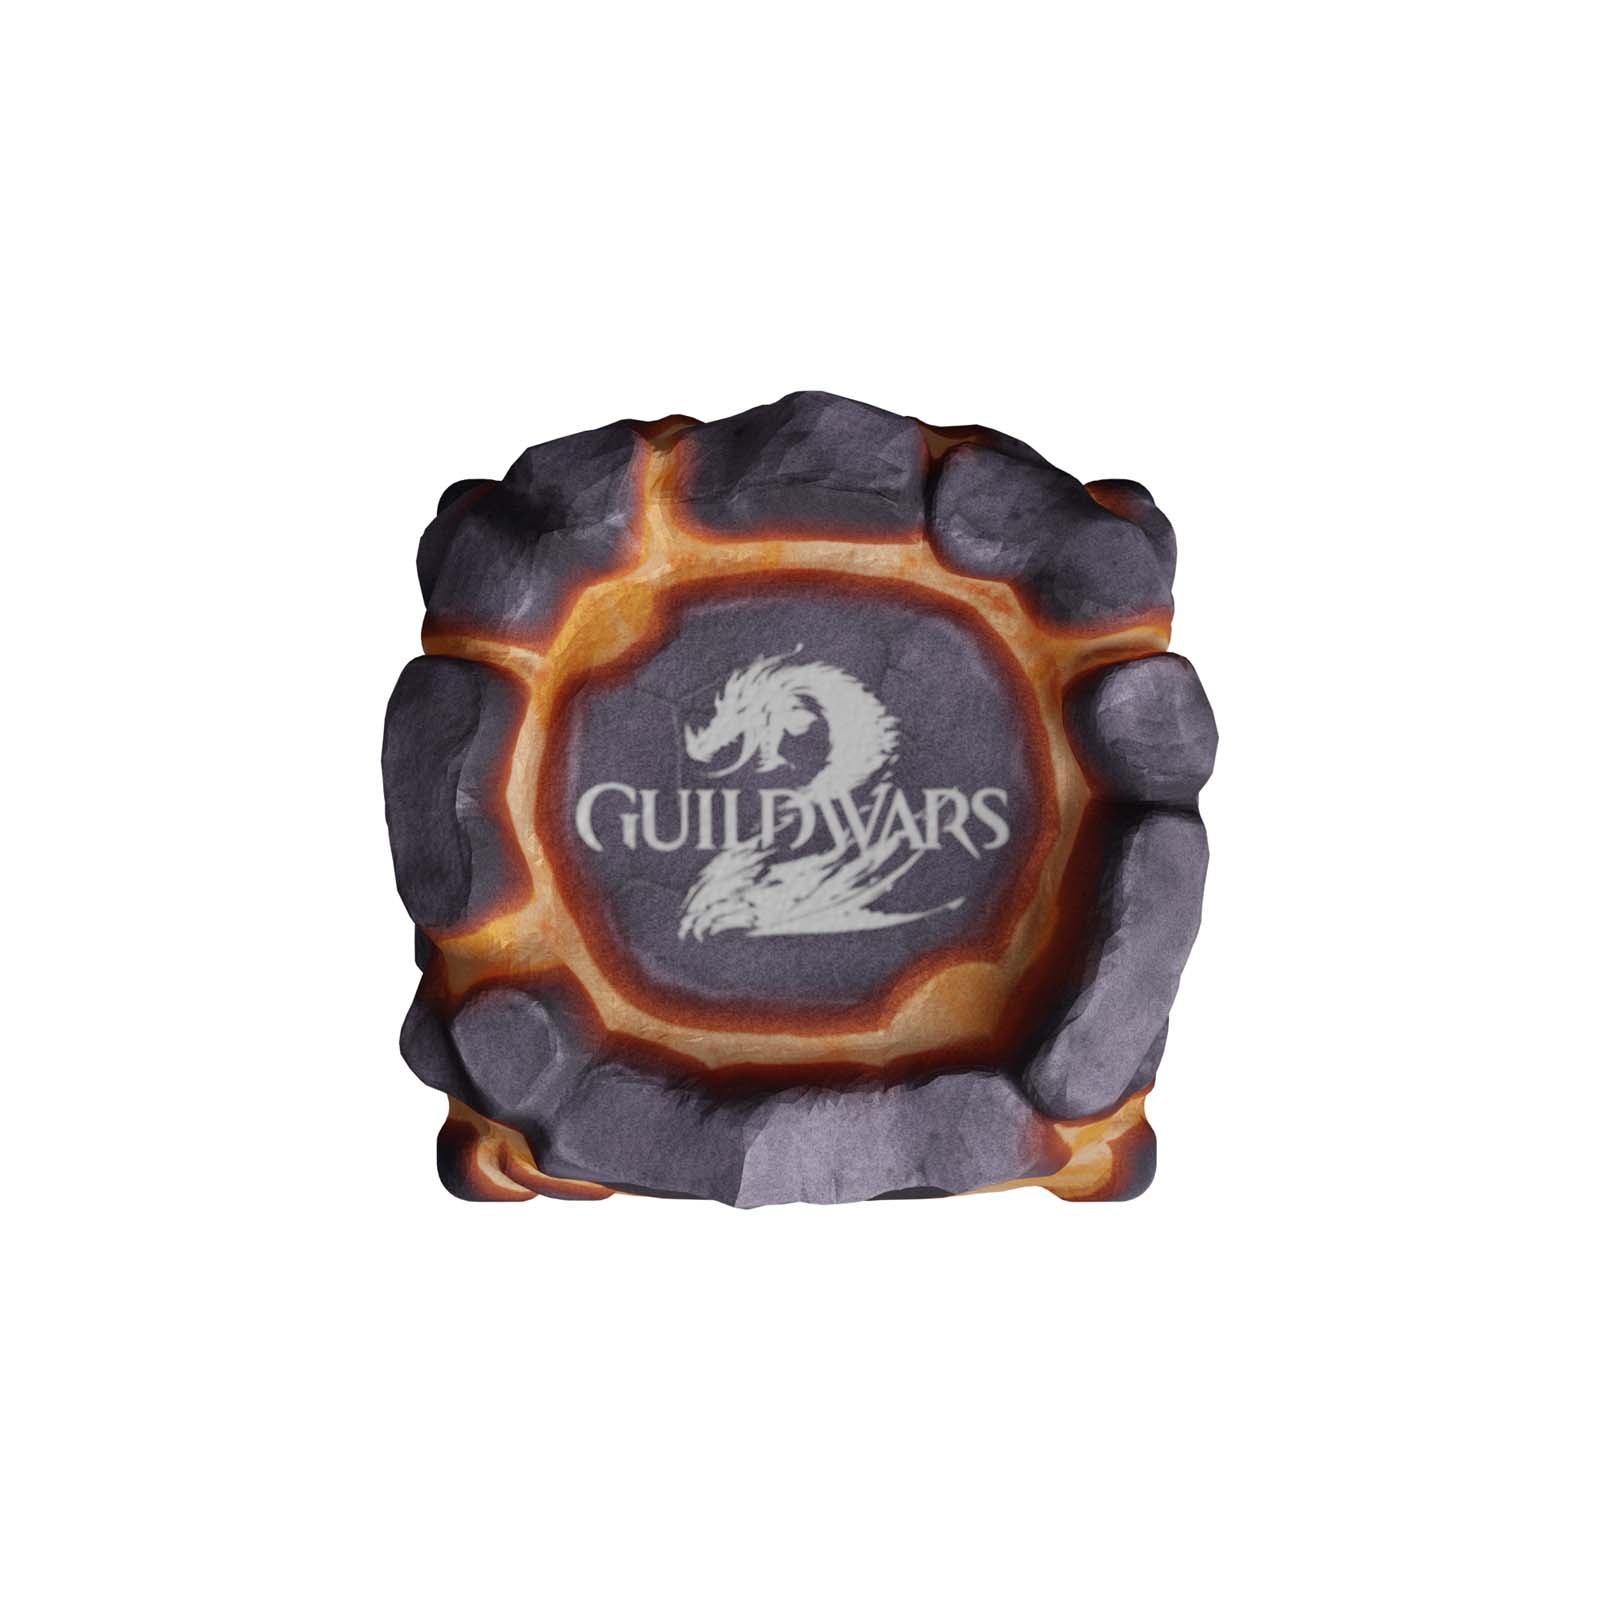 SteelSeries gaming mousepad with Guild Wars 2 logo at